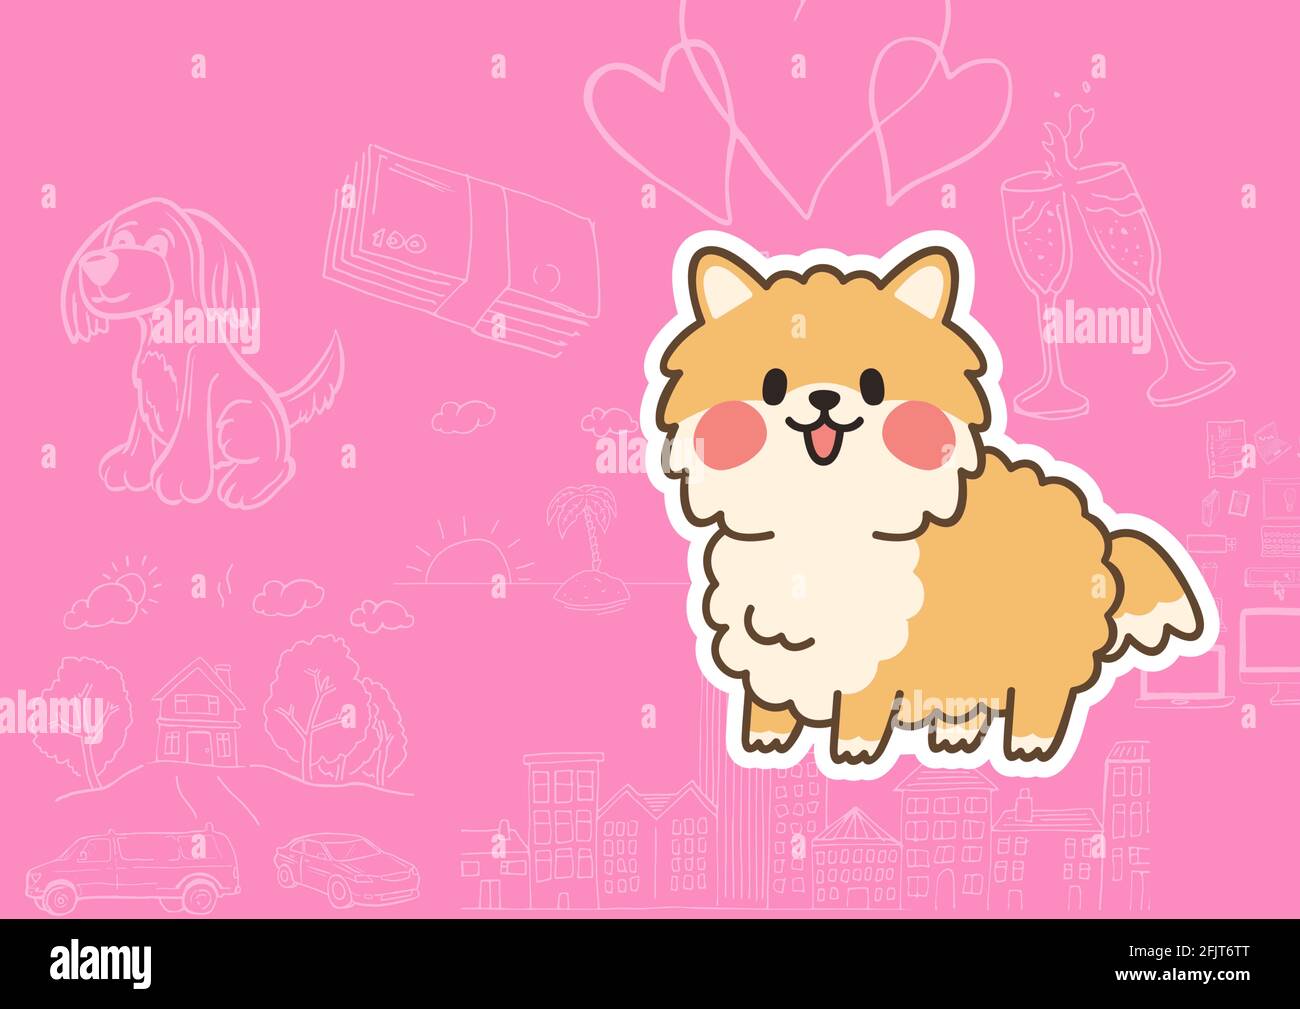 Digitally generated image of cute puppy dog icon against multiple abstract icons on pink background Stock Photo